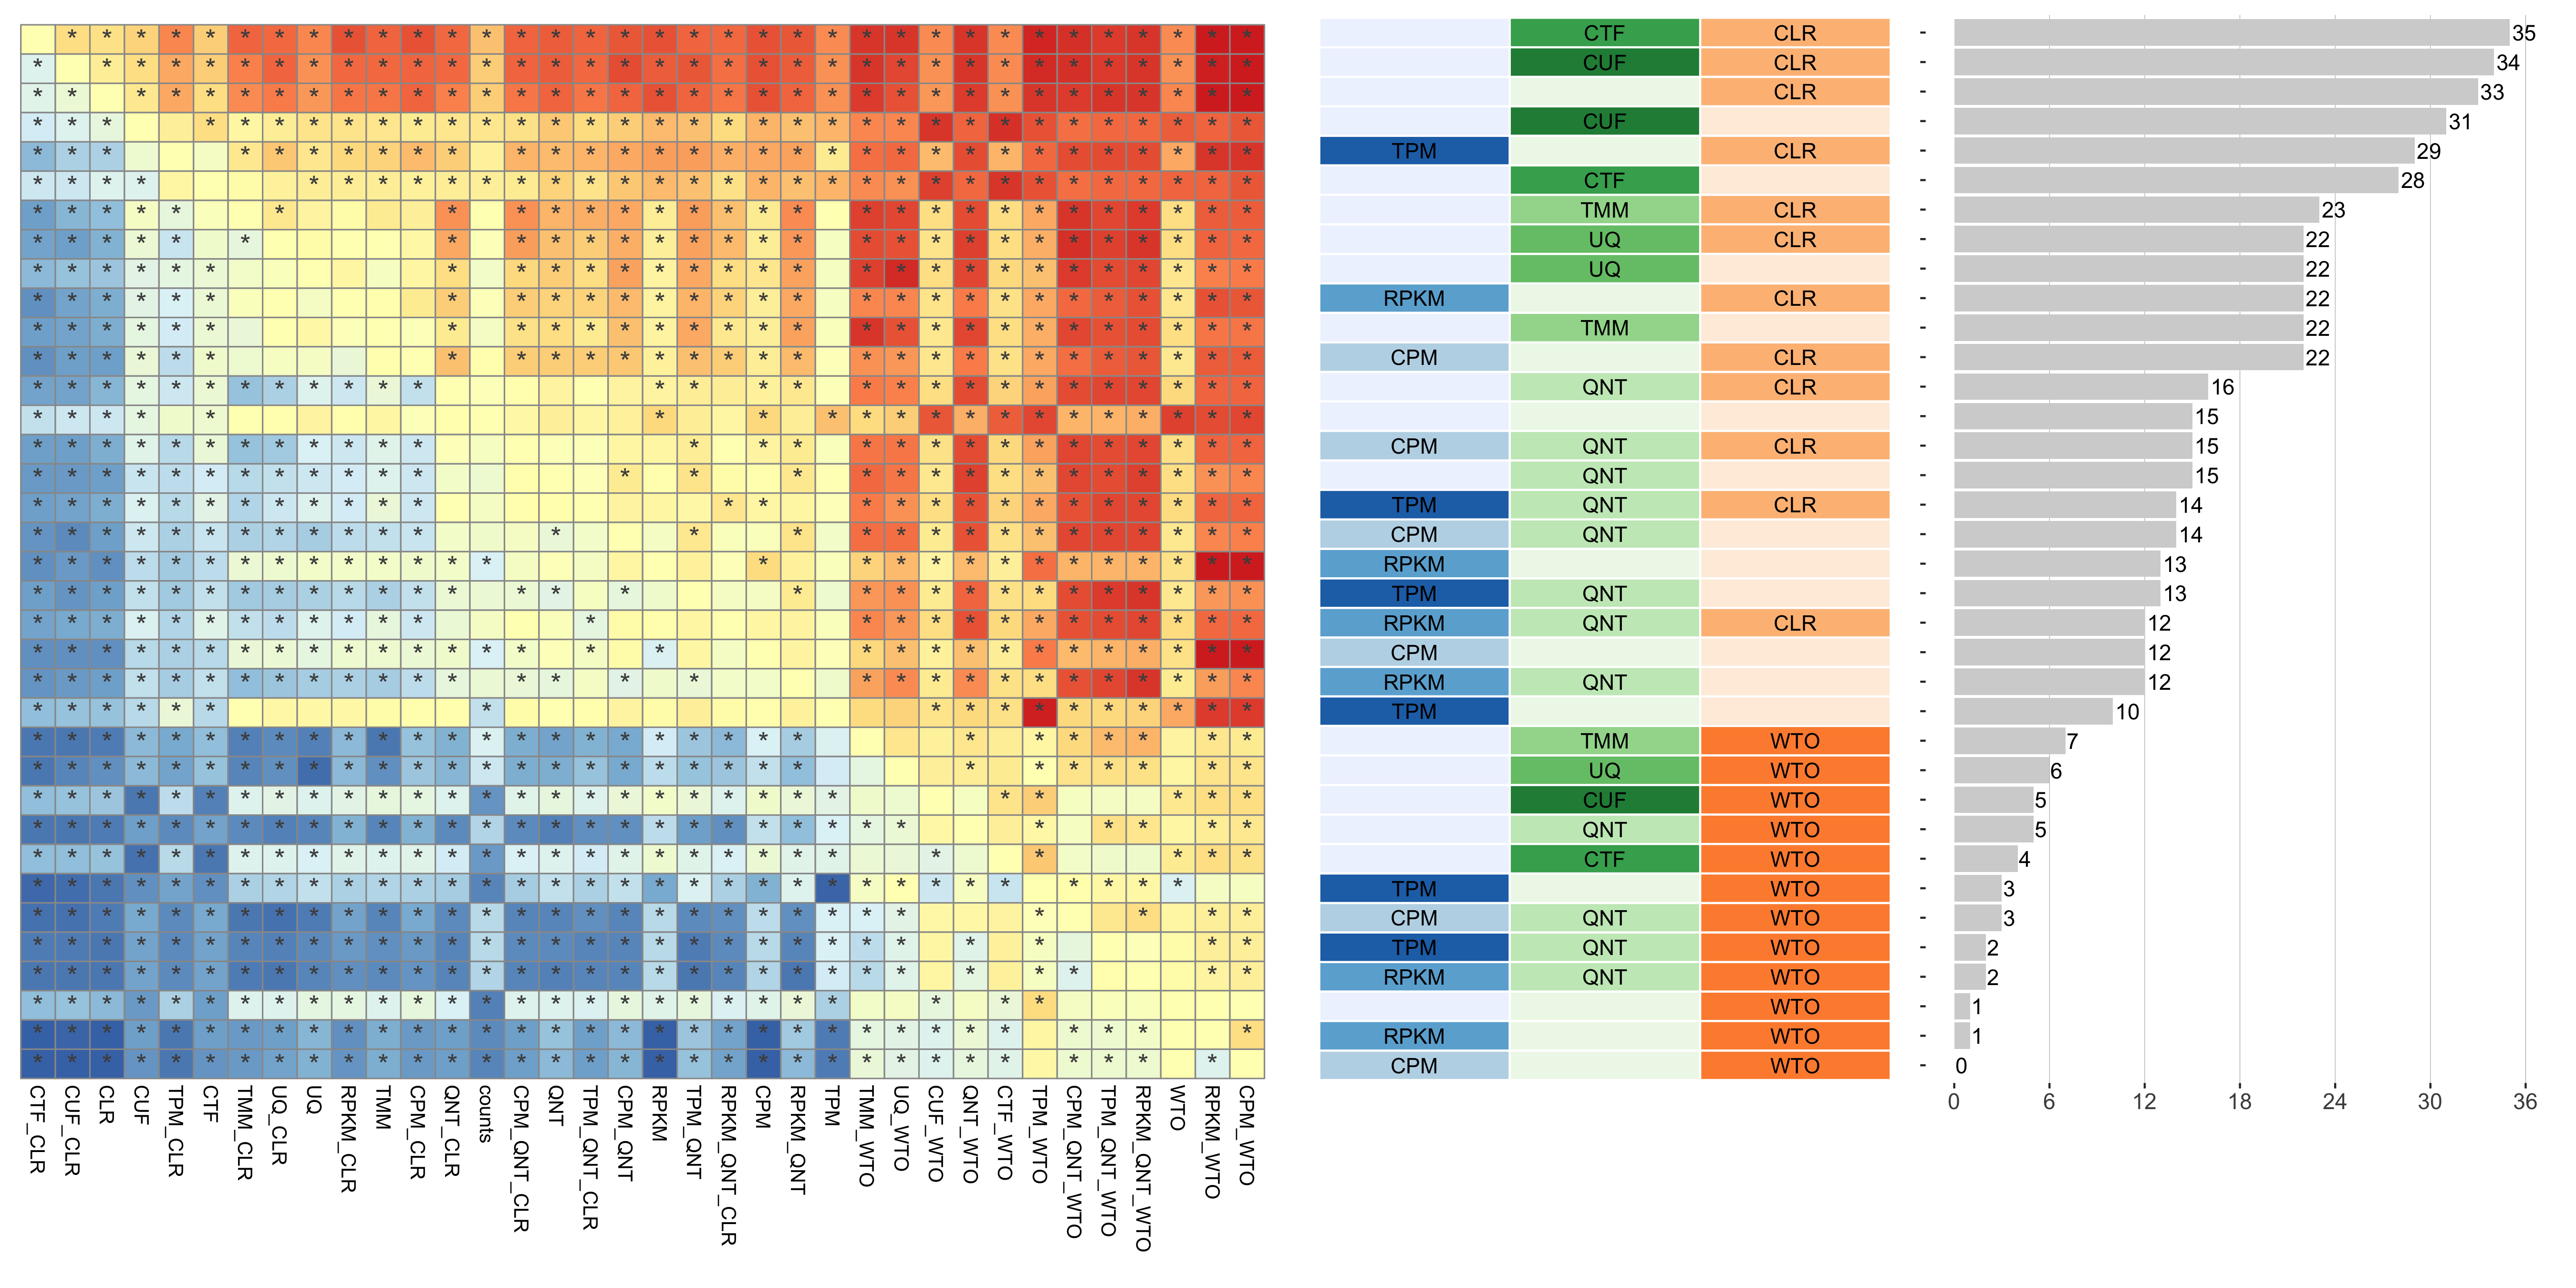 **Dataset-level pairwise comparison of workflow performance.** (**left**) The heatmap shows the relative performance of a pair of workflows, corresponding to a row and a column, directly compared to each other for the resampled GTEx datasets of a given sample size based on the tissue-aware gold standard. The color in each cell (row, column) represents the proportion of datasets for which the workflow along the row has a higher log2(auPRC/prior) than the workflow along the column. Comparisons that are statistically significant (corrected p < 0.01) based on a paired Wilcoxon test are marked with an asterisk. (**middle**) The workflows (rows) are described in terms of the specific method used in the within-sample normalization (blues), between-sample normalization (greens), and network transformation (oranges) stages. (**right**) The barplot shows the number of times each workflow was significantly greater than another workflow.